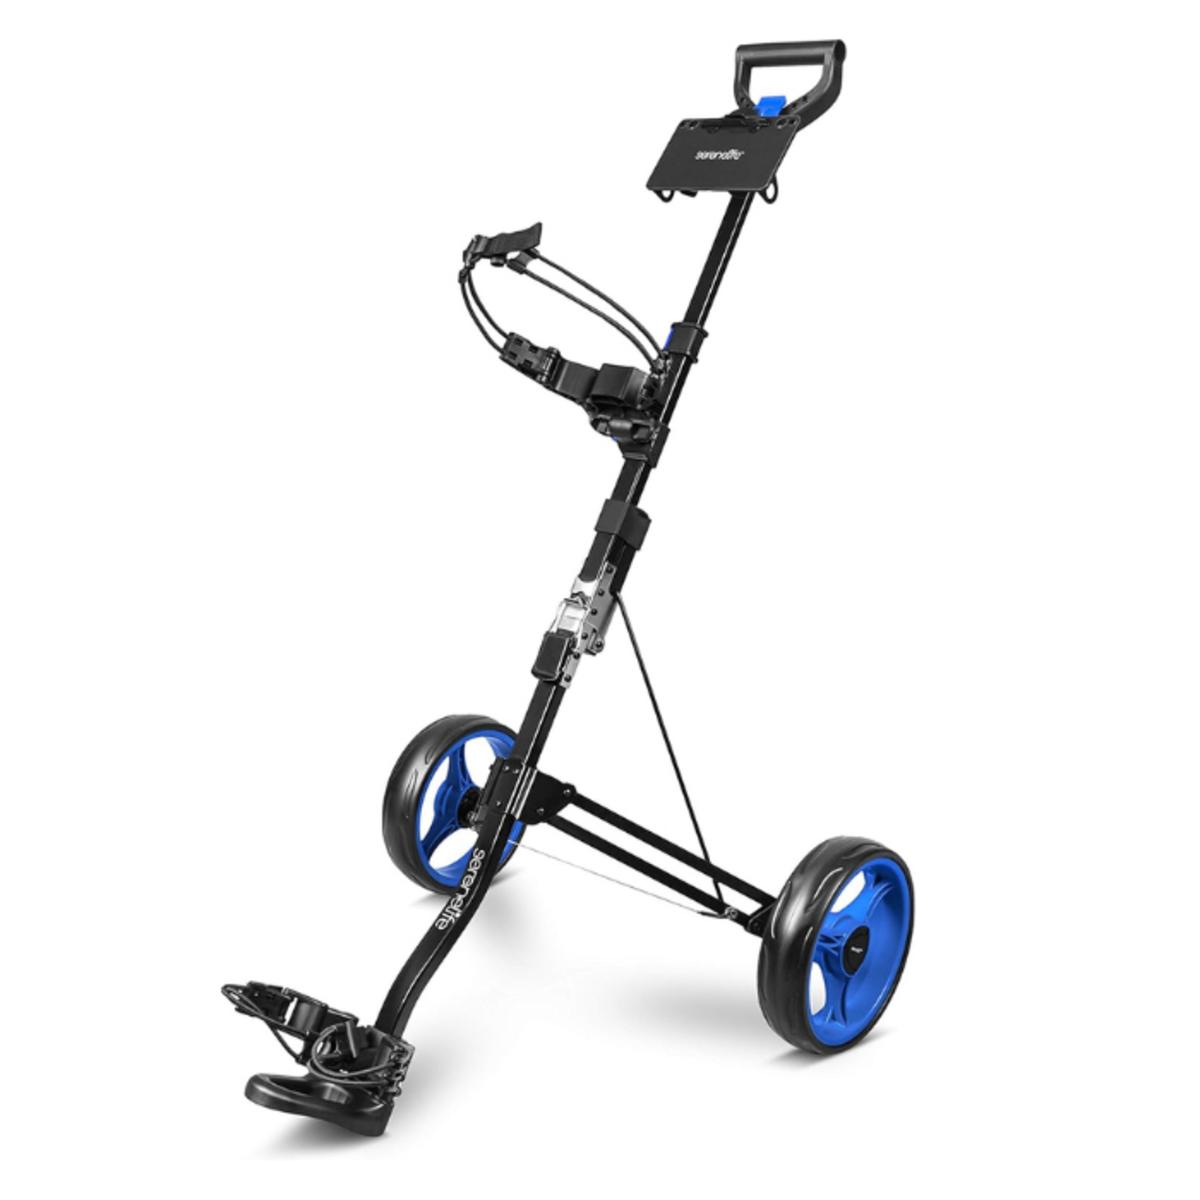 Is the World's SMALLEST Golf Push Cart Worth the Hype? 